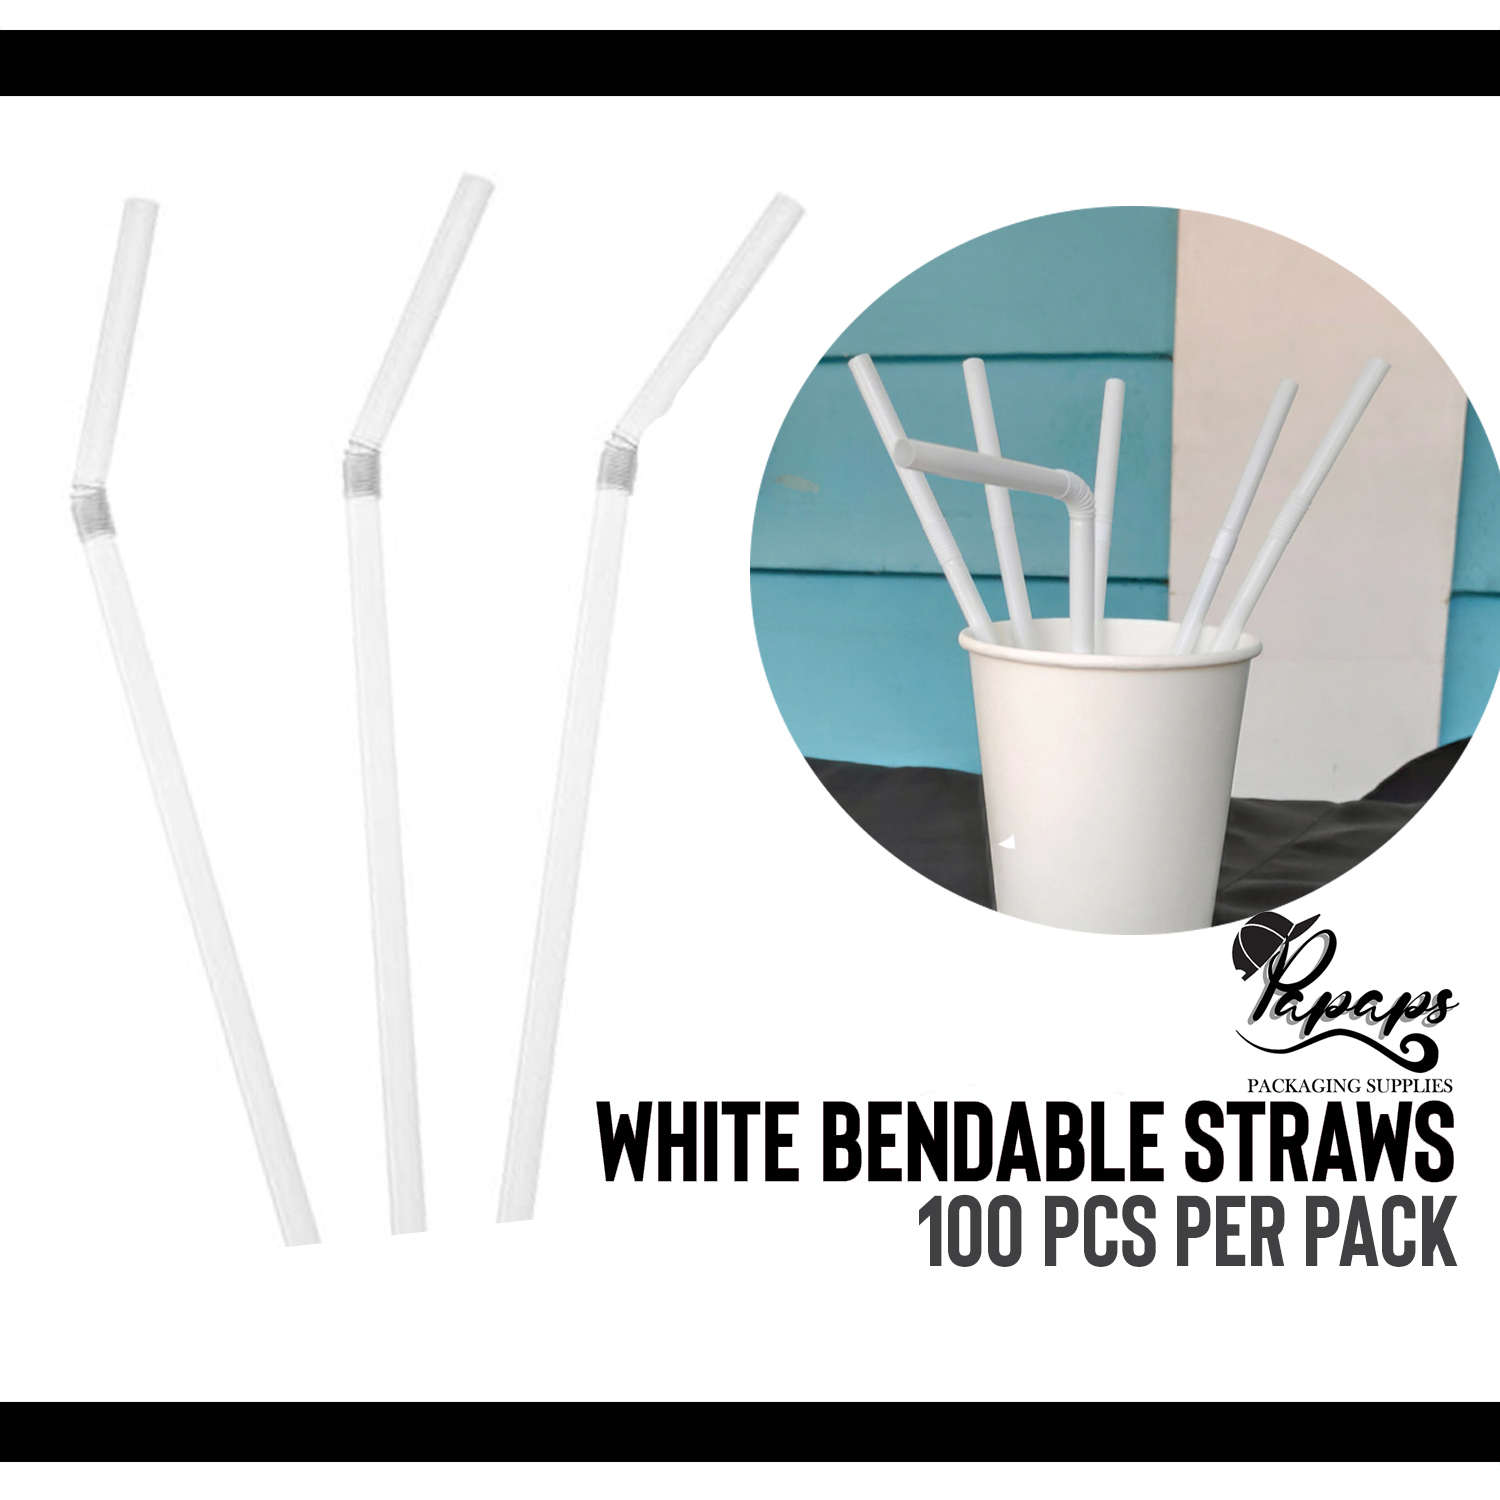 White Bendable Straw not individually wrapped 100pcs/pack